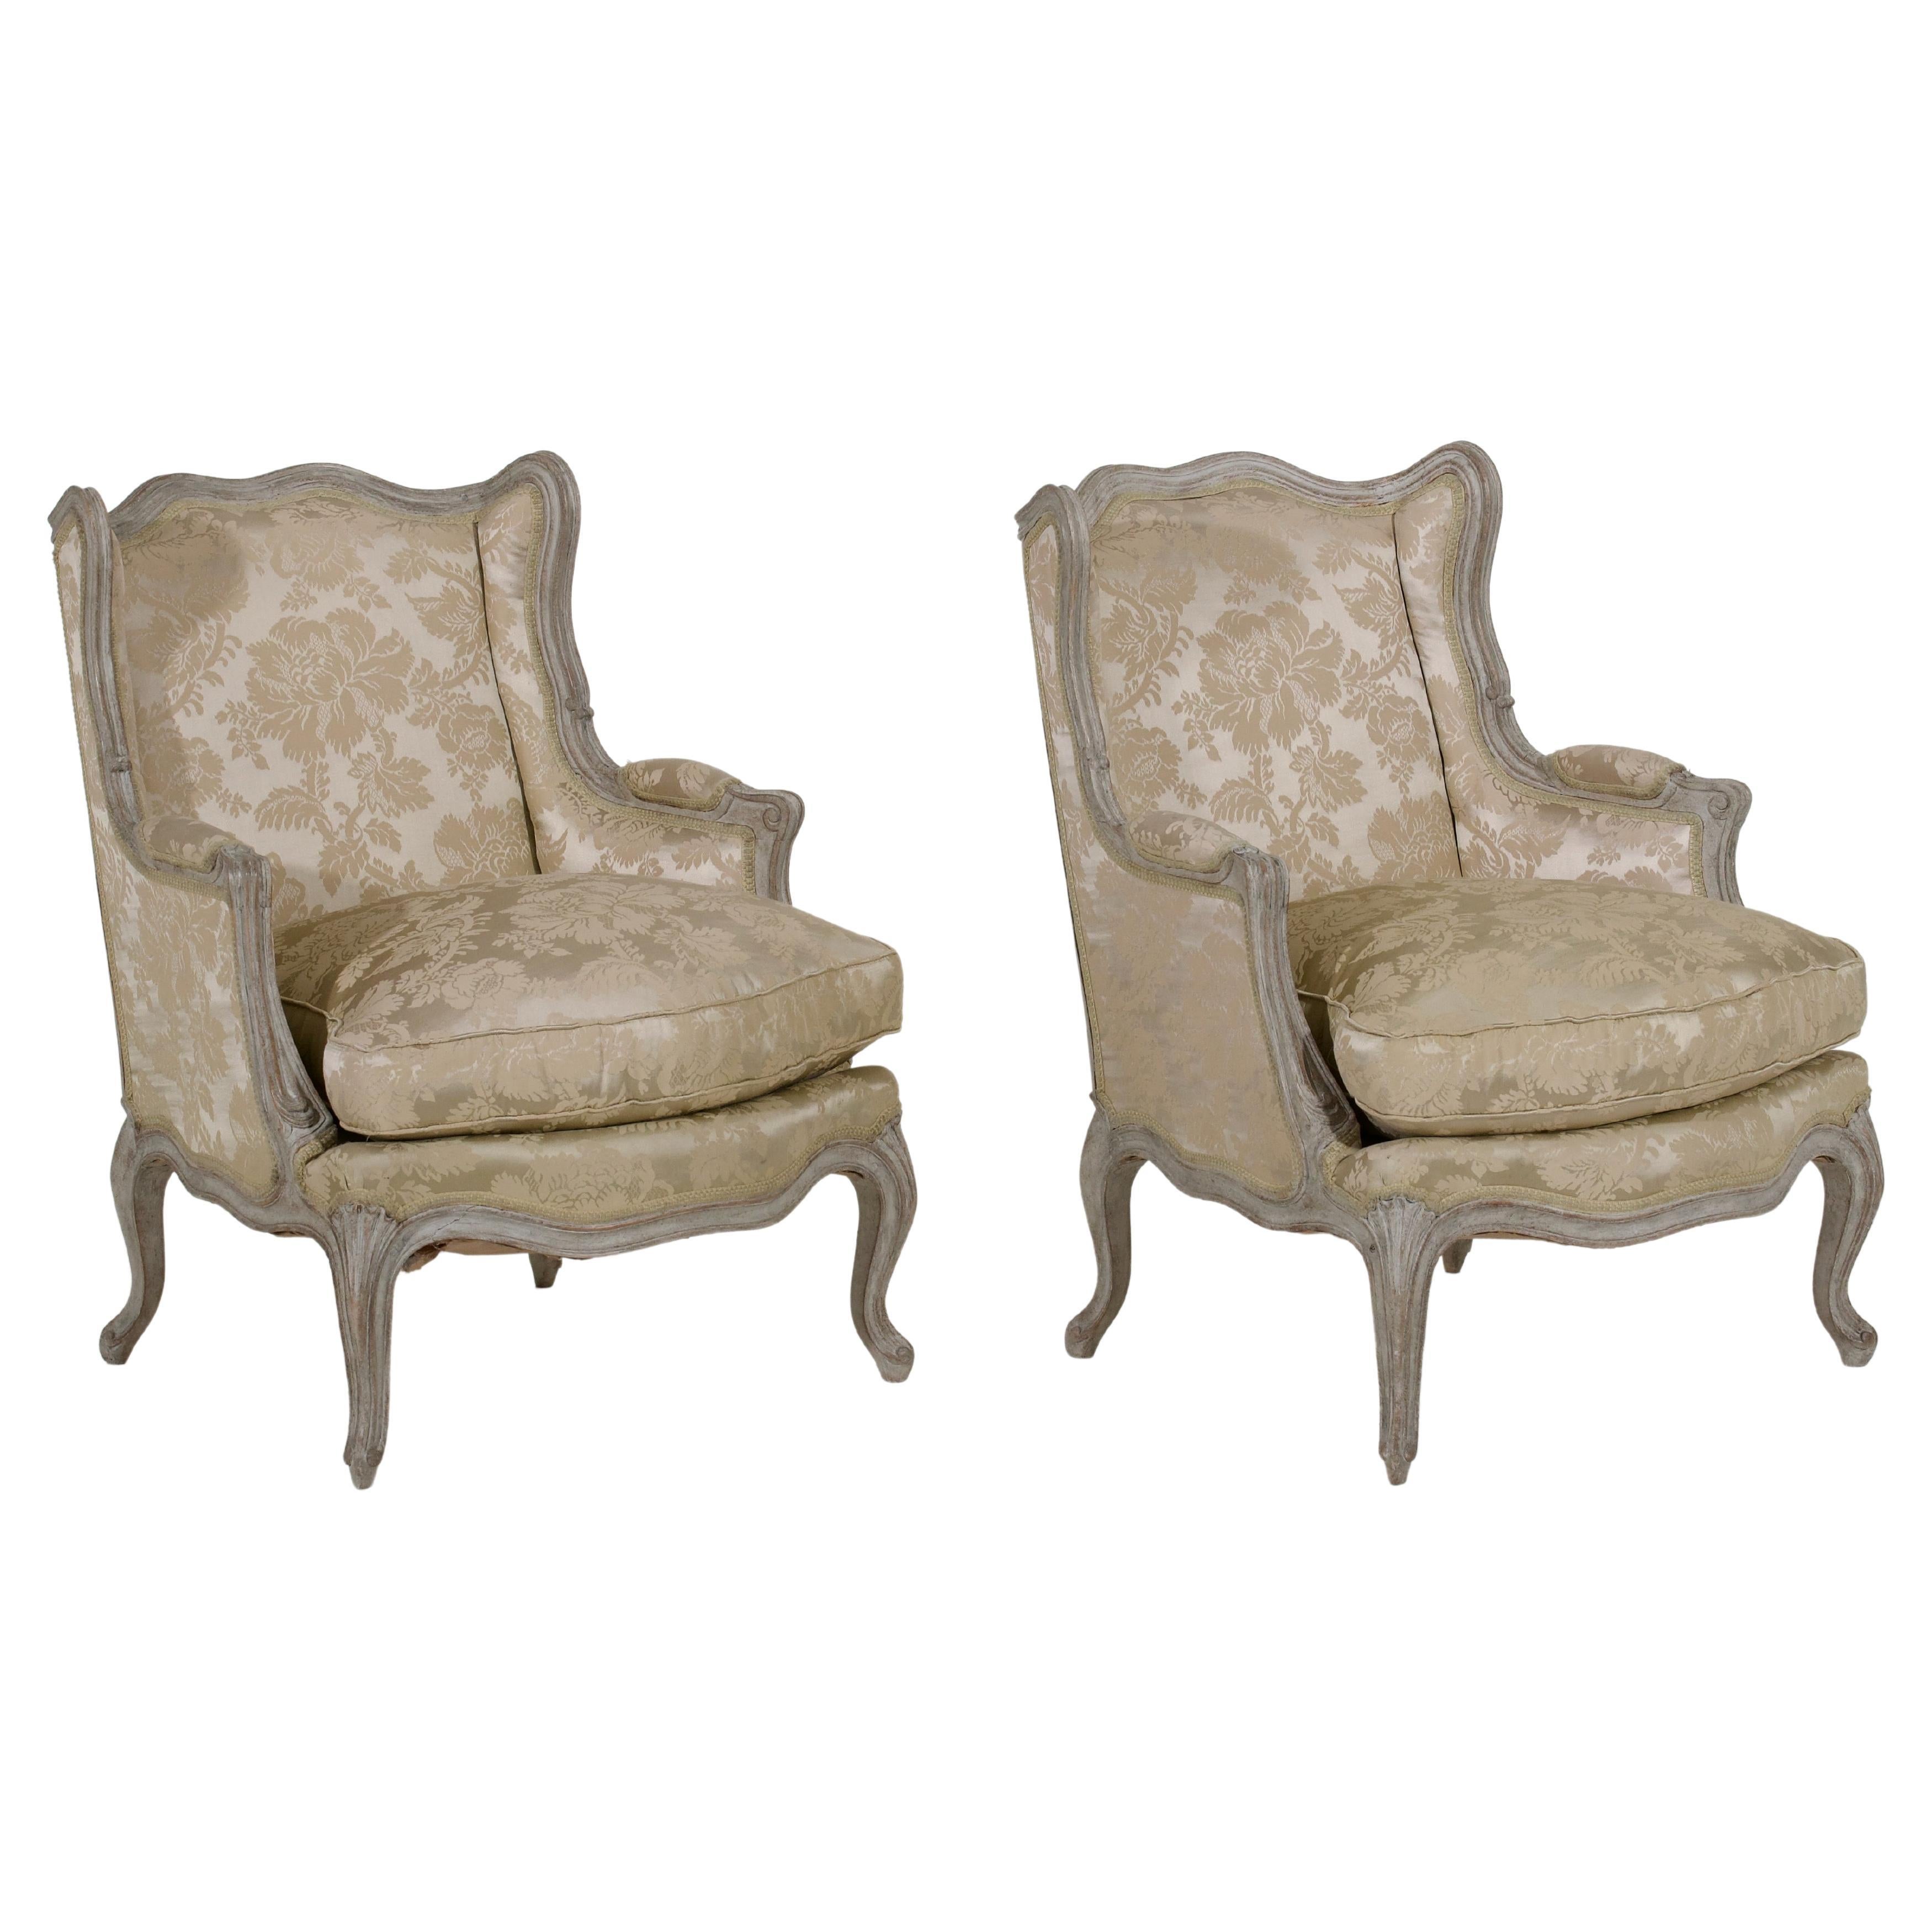 Pair of Rococo Style Armchairs, circa 100 Years Old